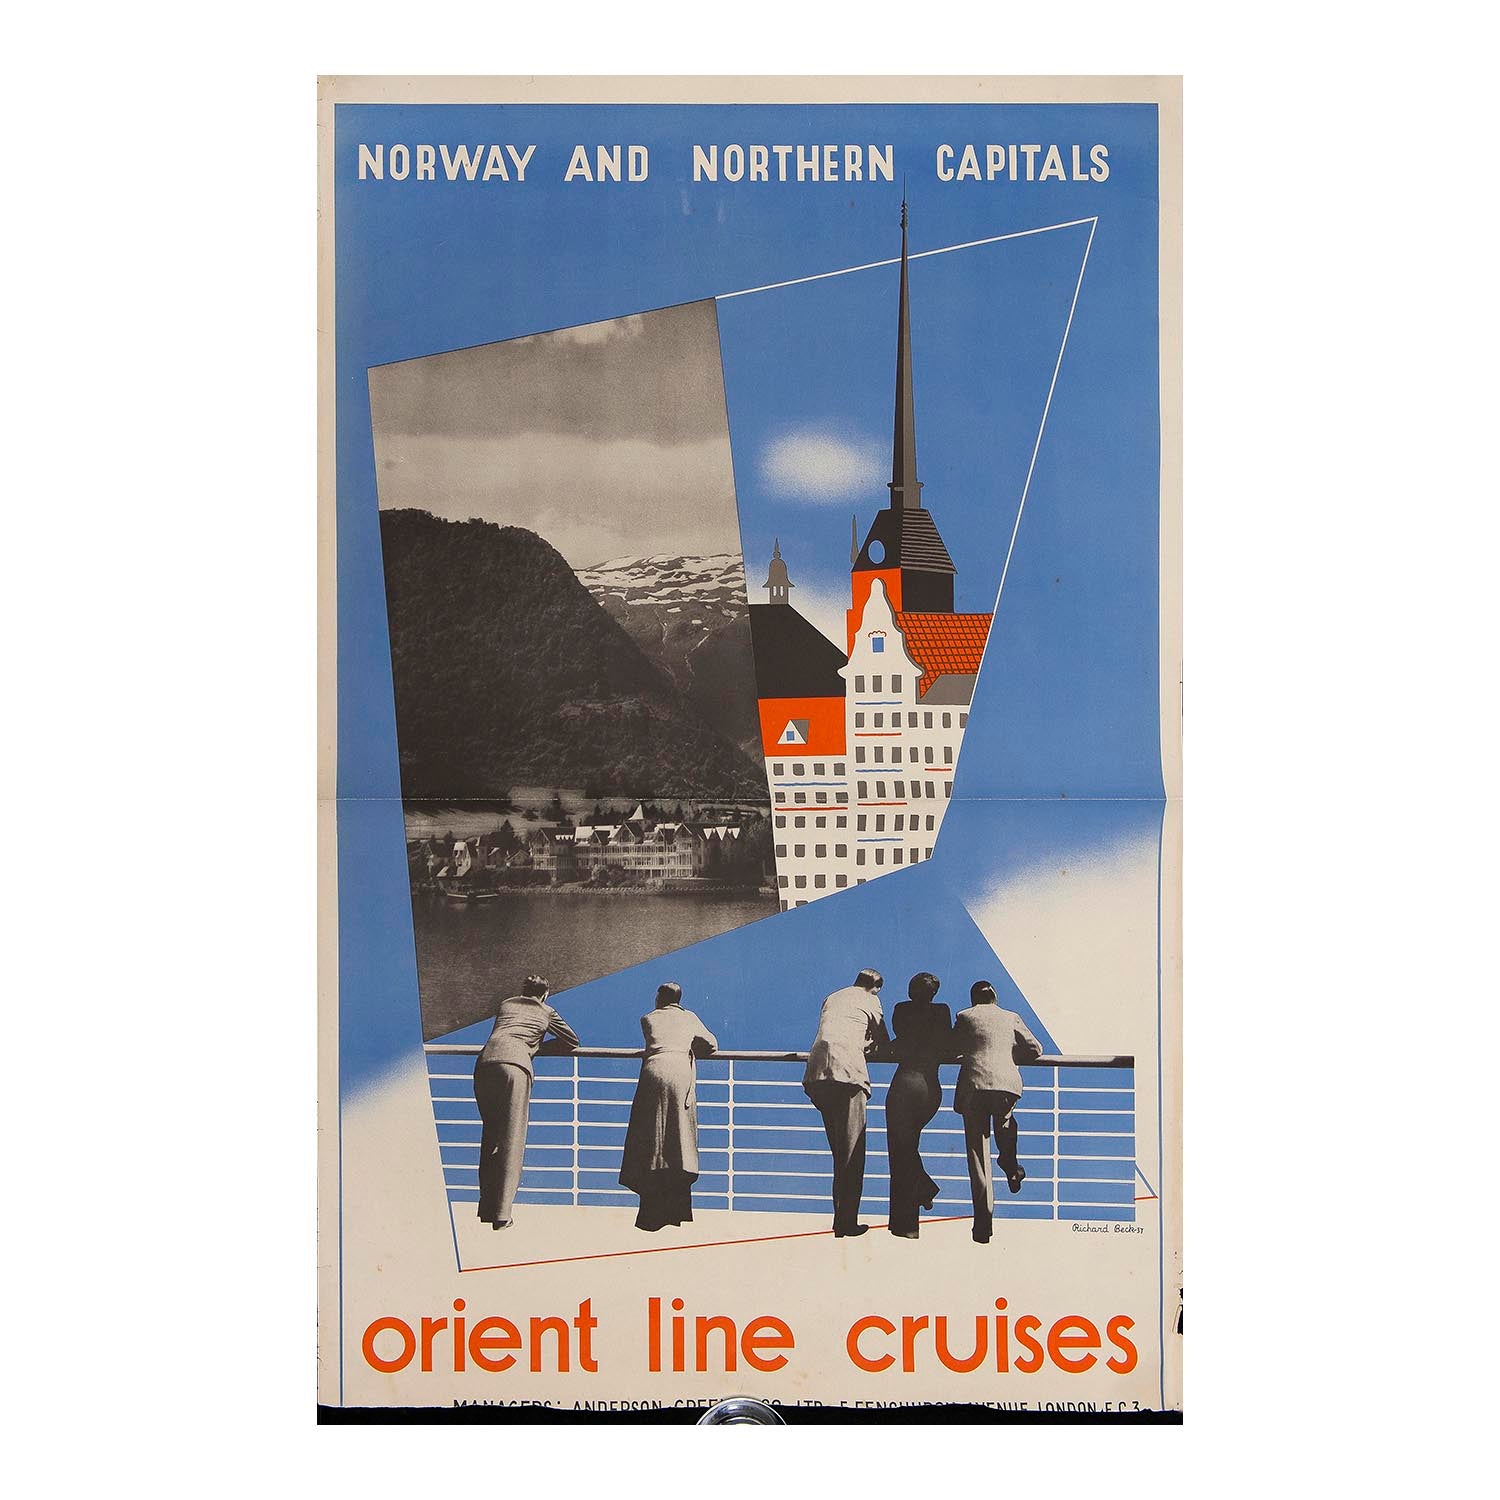 Travel poster, Norway and Northern Capitals, designed by Richard Beck, published by the Orient Steam Navigation Company (Orient Line). The design features passengers on board an Orient Line cruise ship with photographic and graphic depictions of tourist destinations in the background.